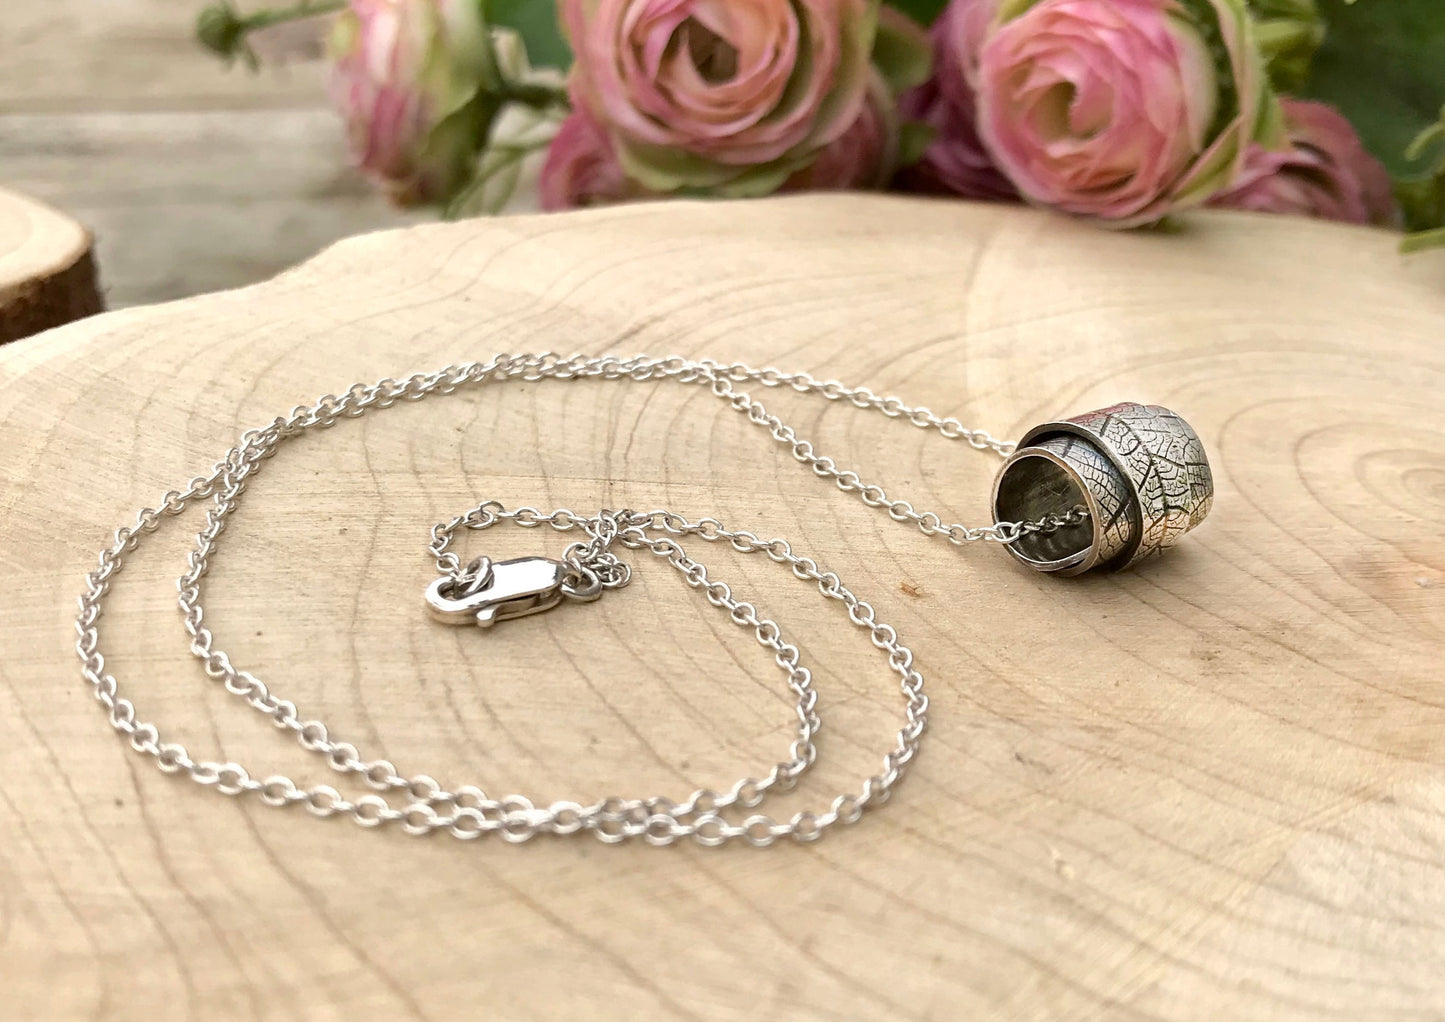 Silver Curled Leaf Necklace by Curious Magpie 